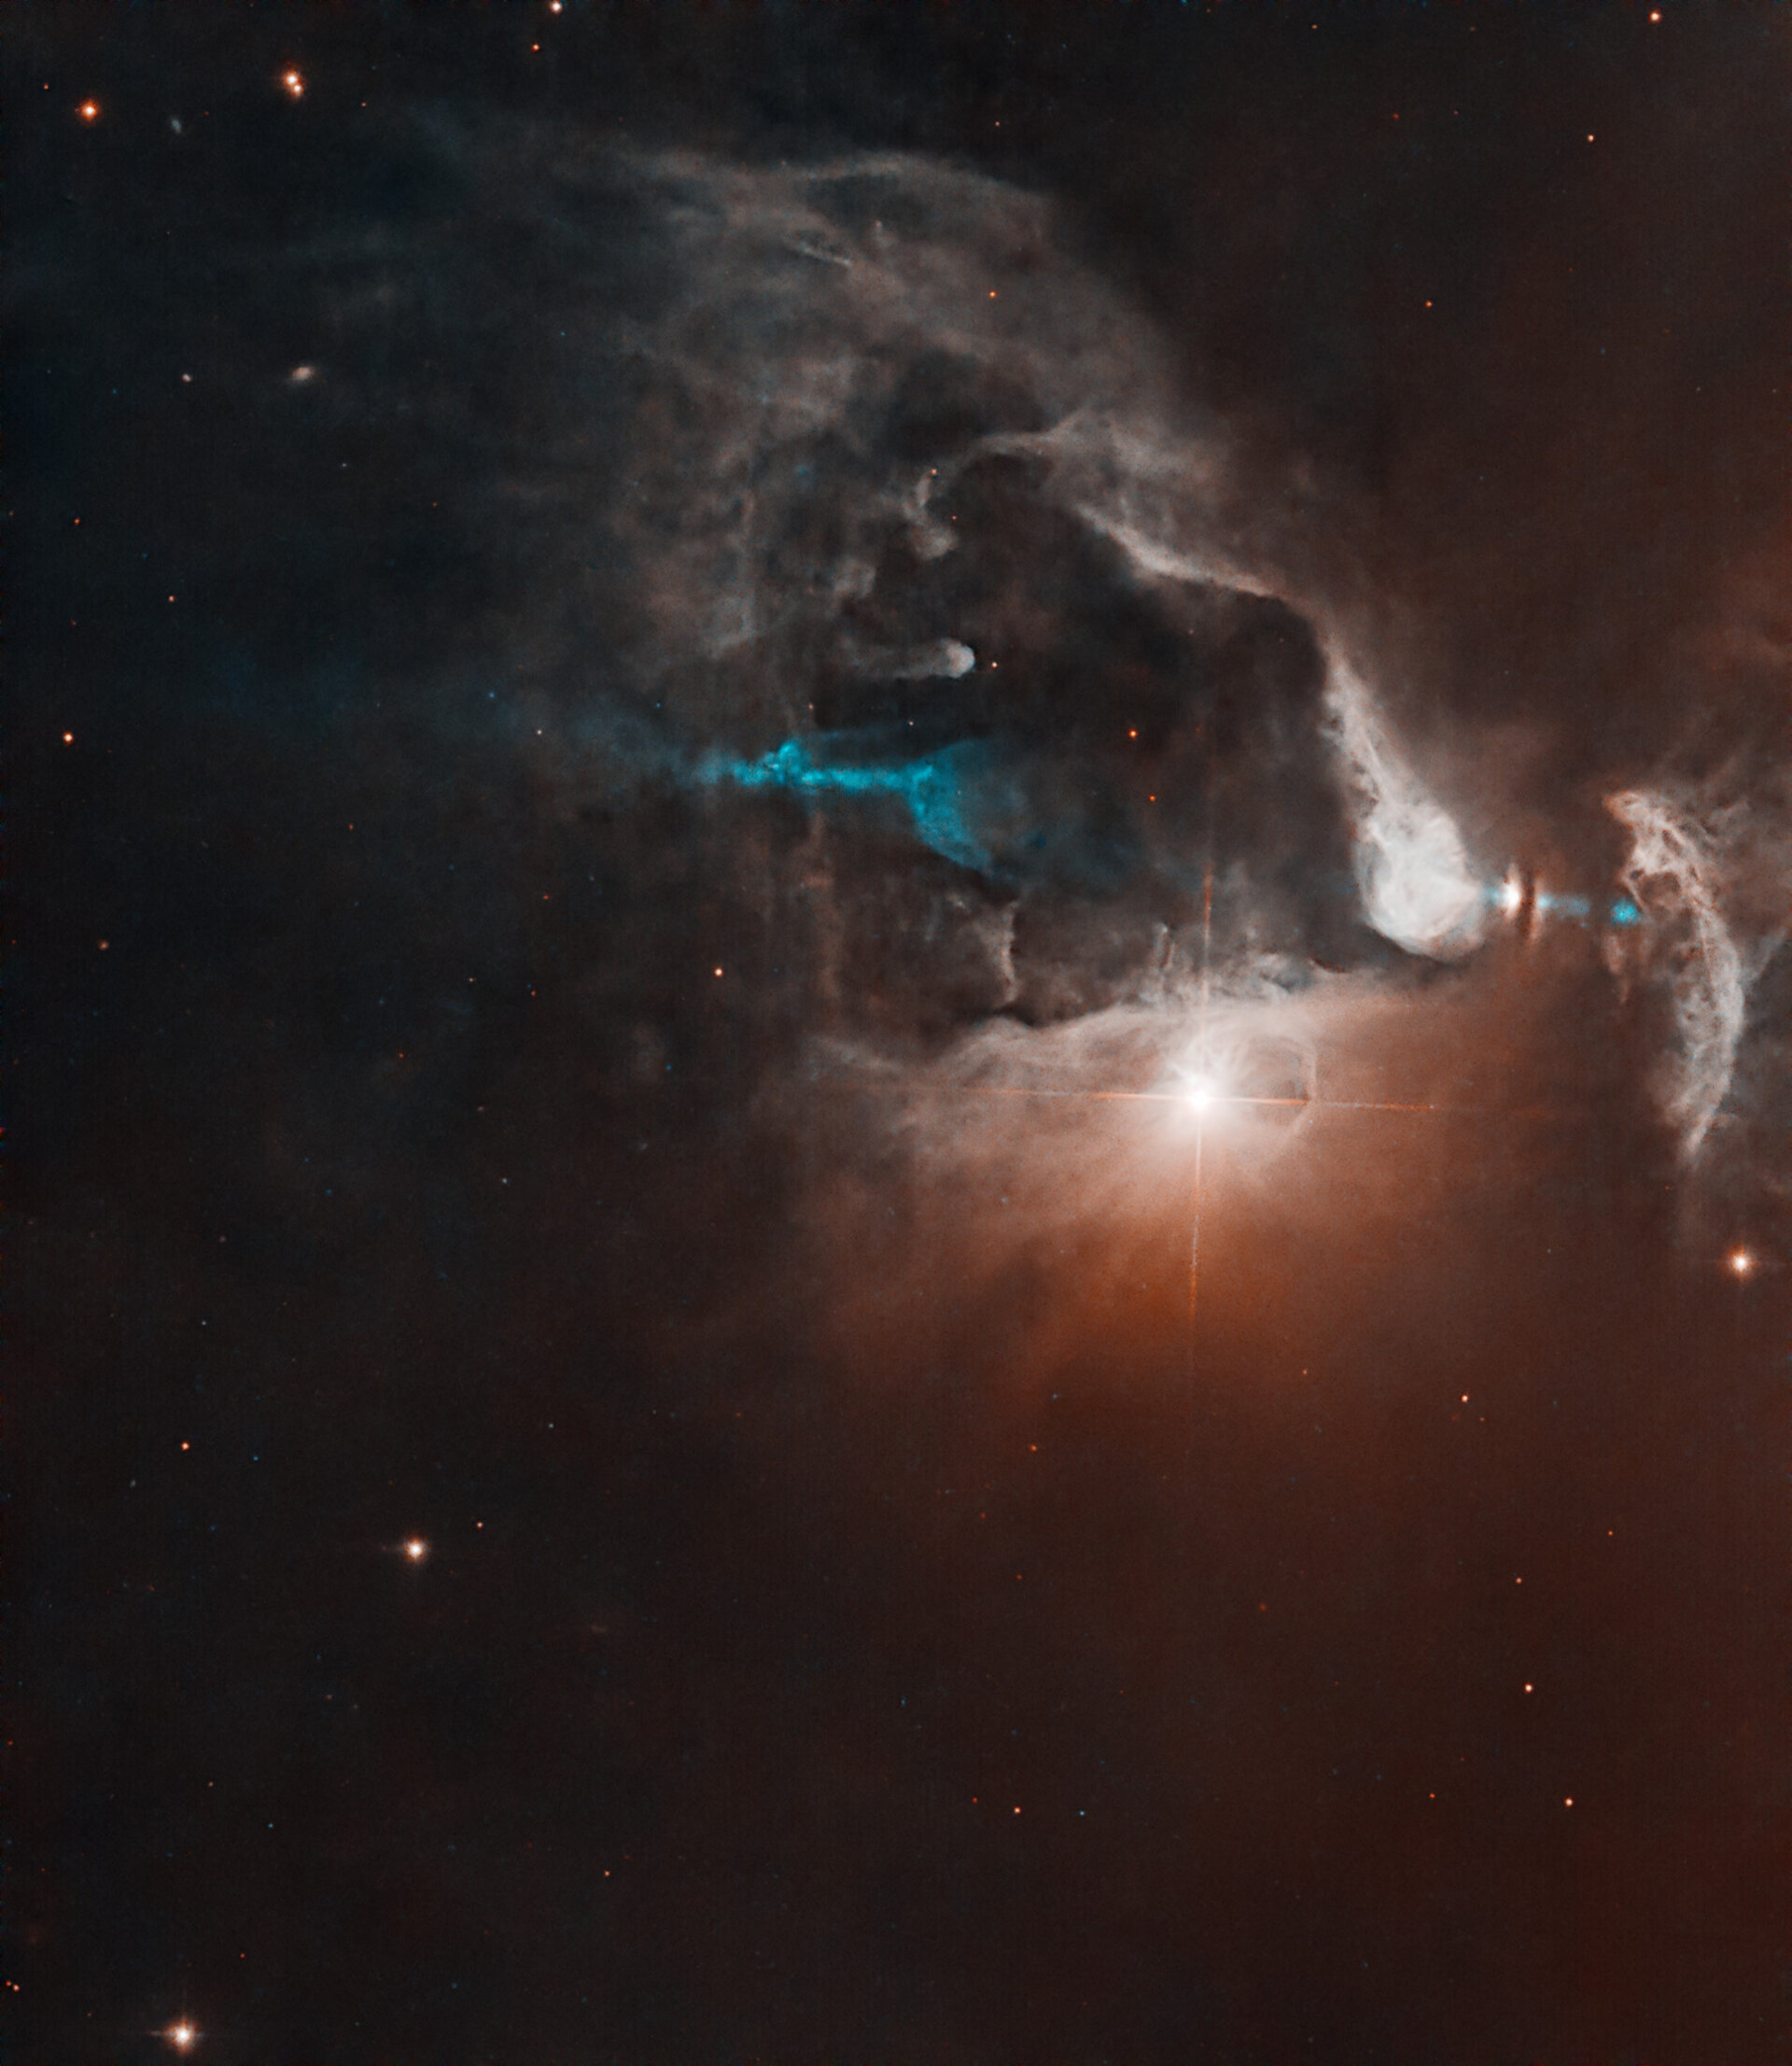 Hubble sees new star proclaiming its presence with cosmic light show